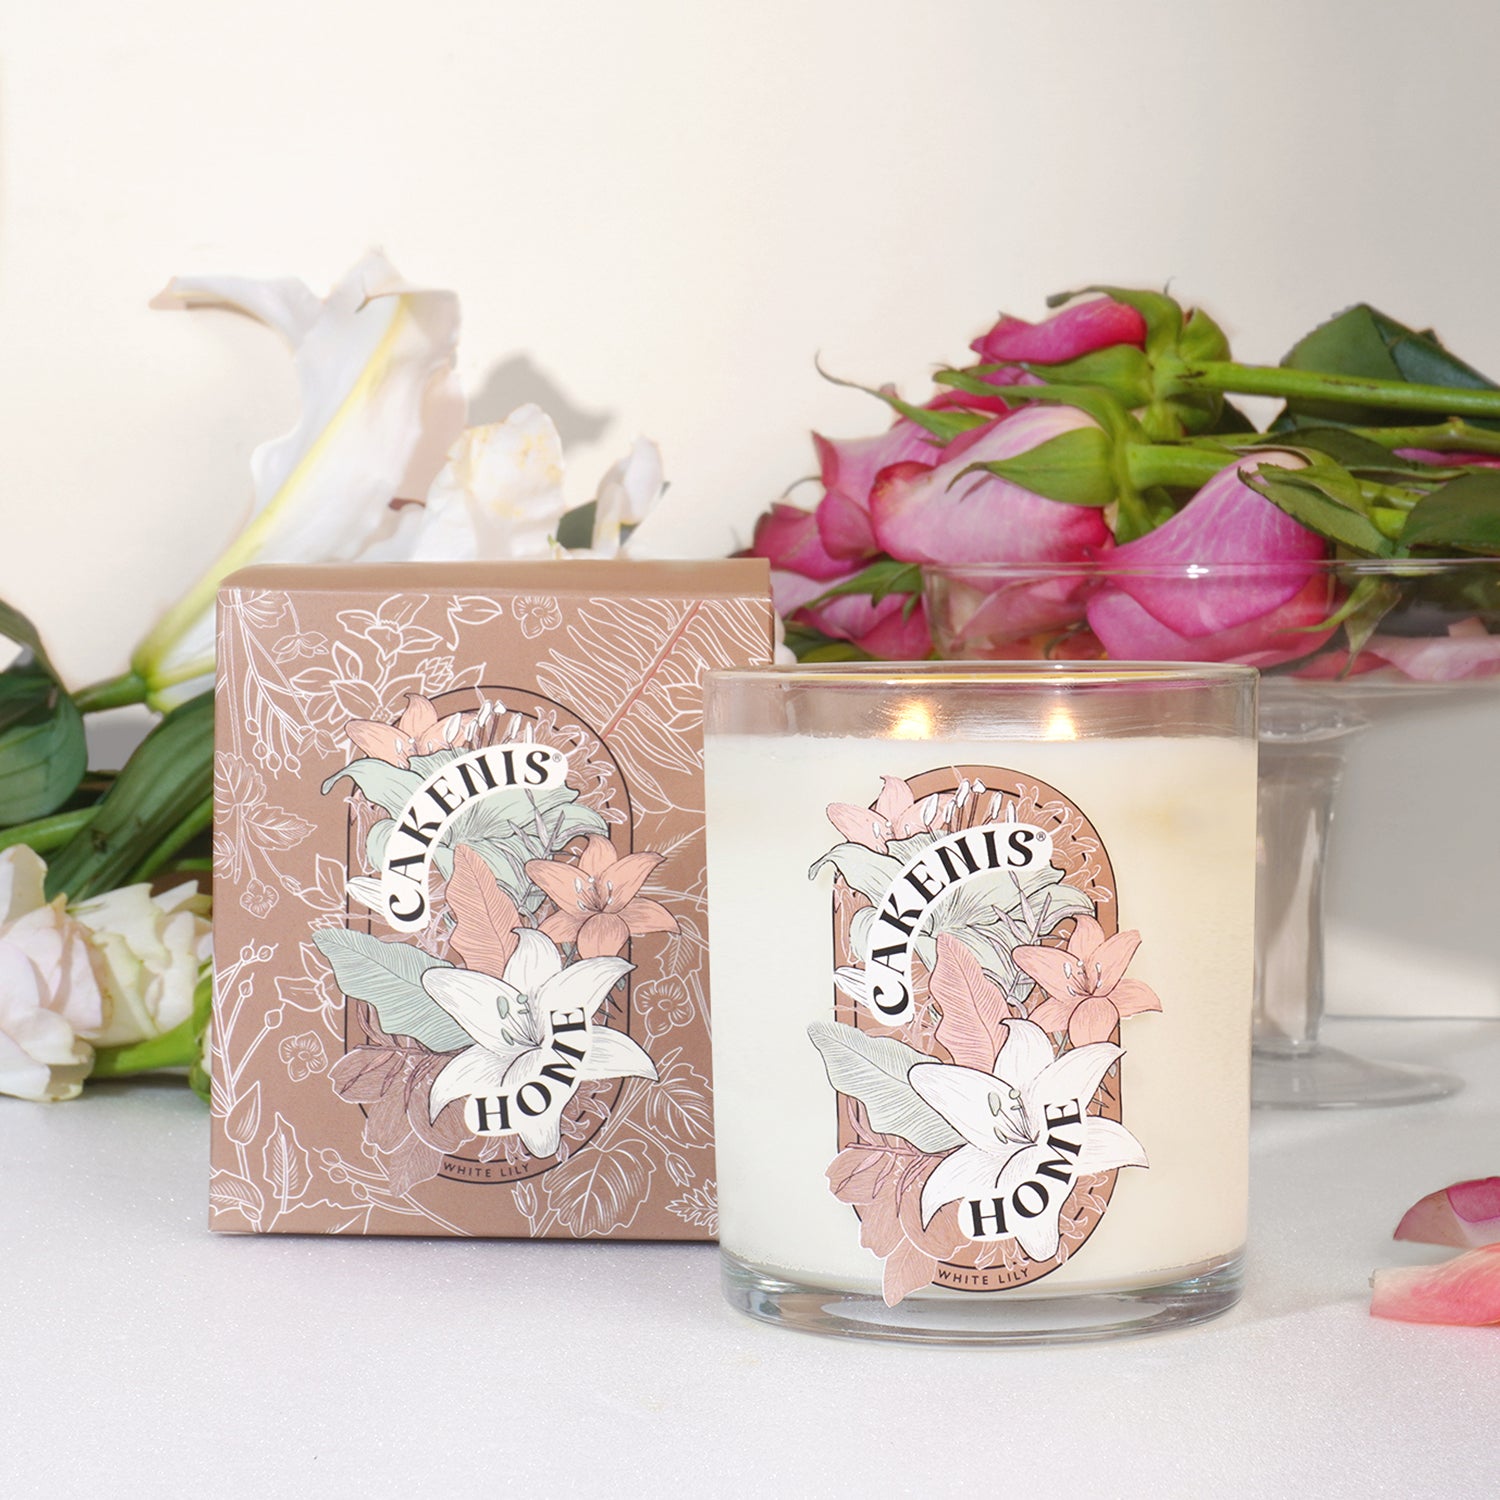 WHITE LILY SCENTED CANDLE